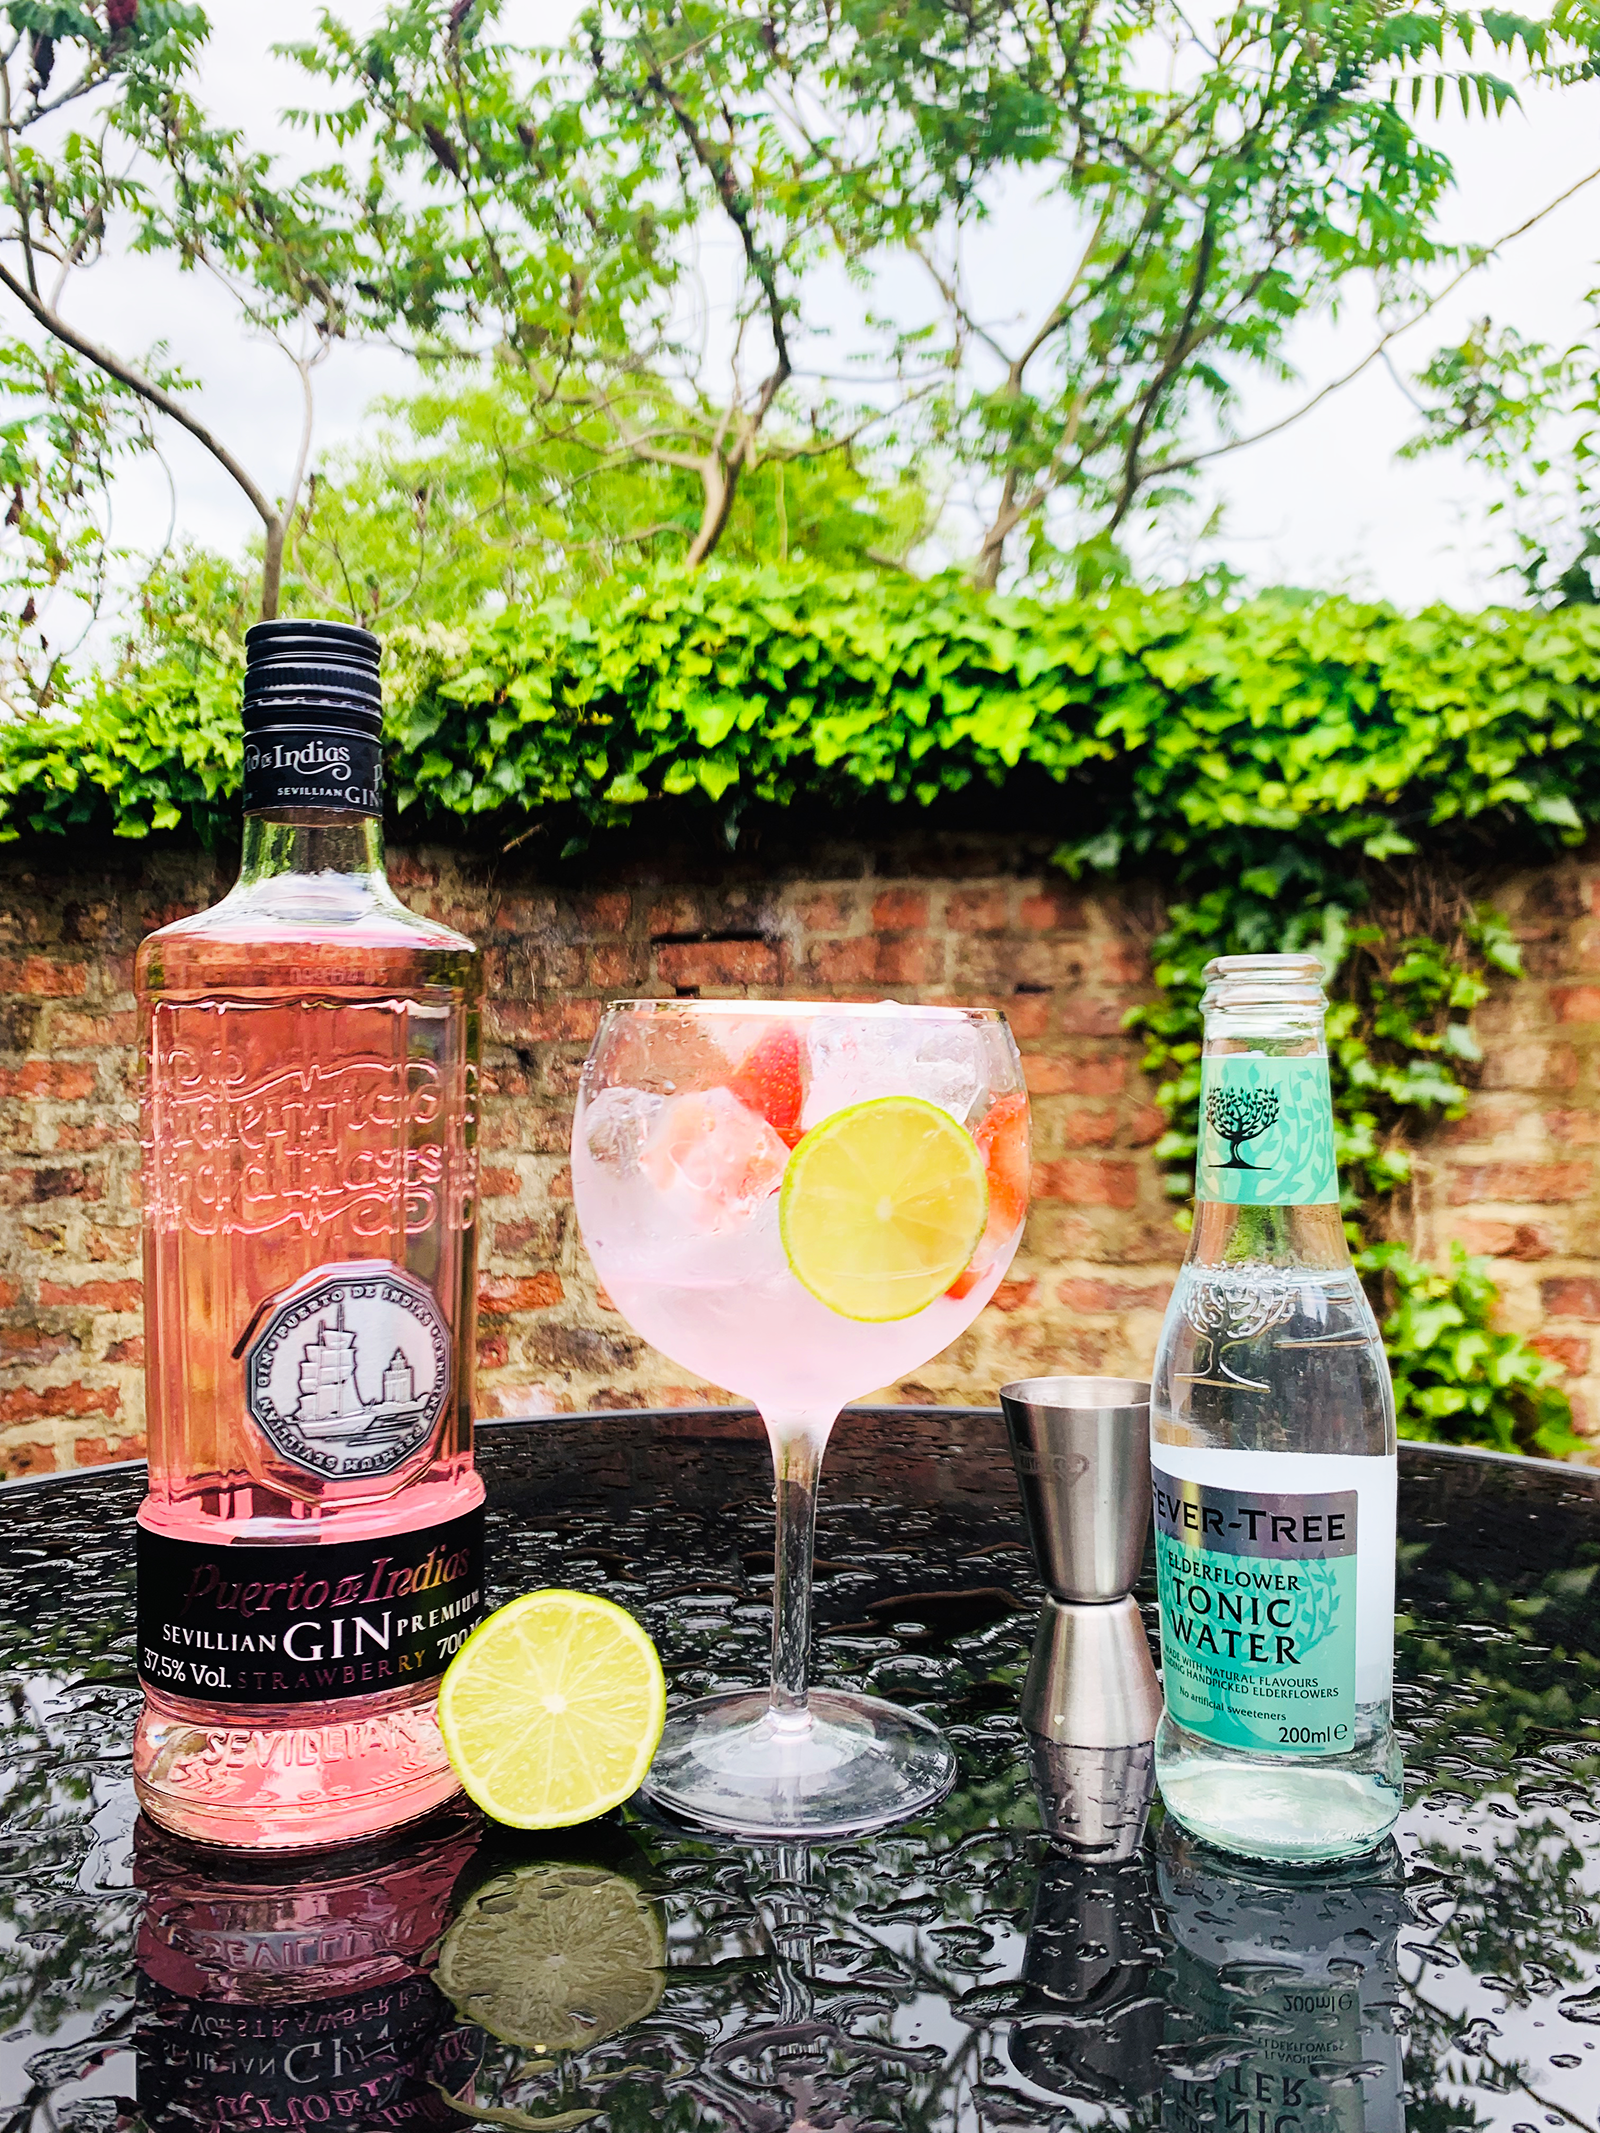 Sevillian Strawberry Tonicly Gin Brings & UK the - Warmer Gin of to Taste a Climates